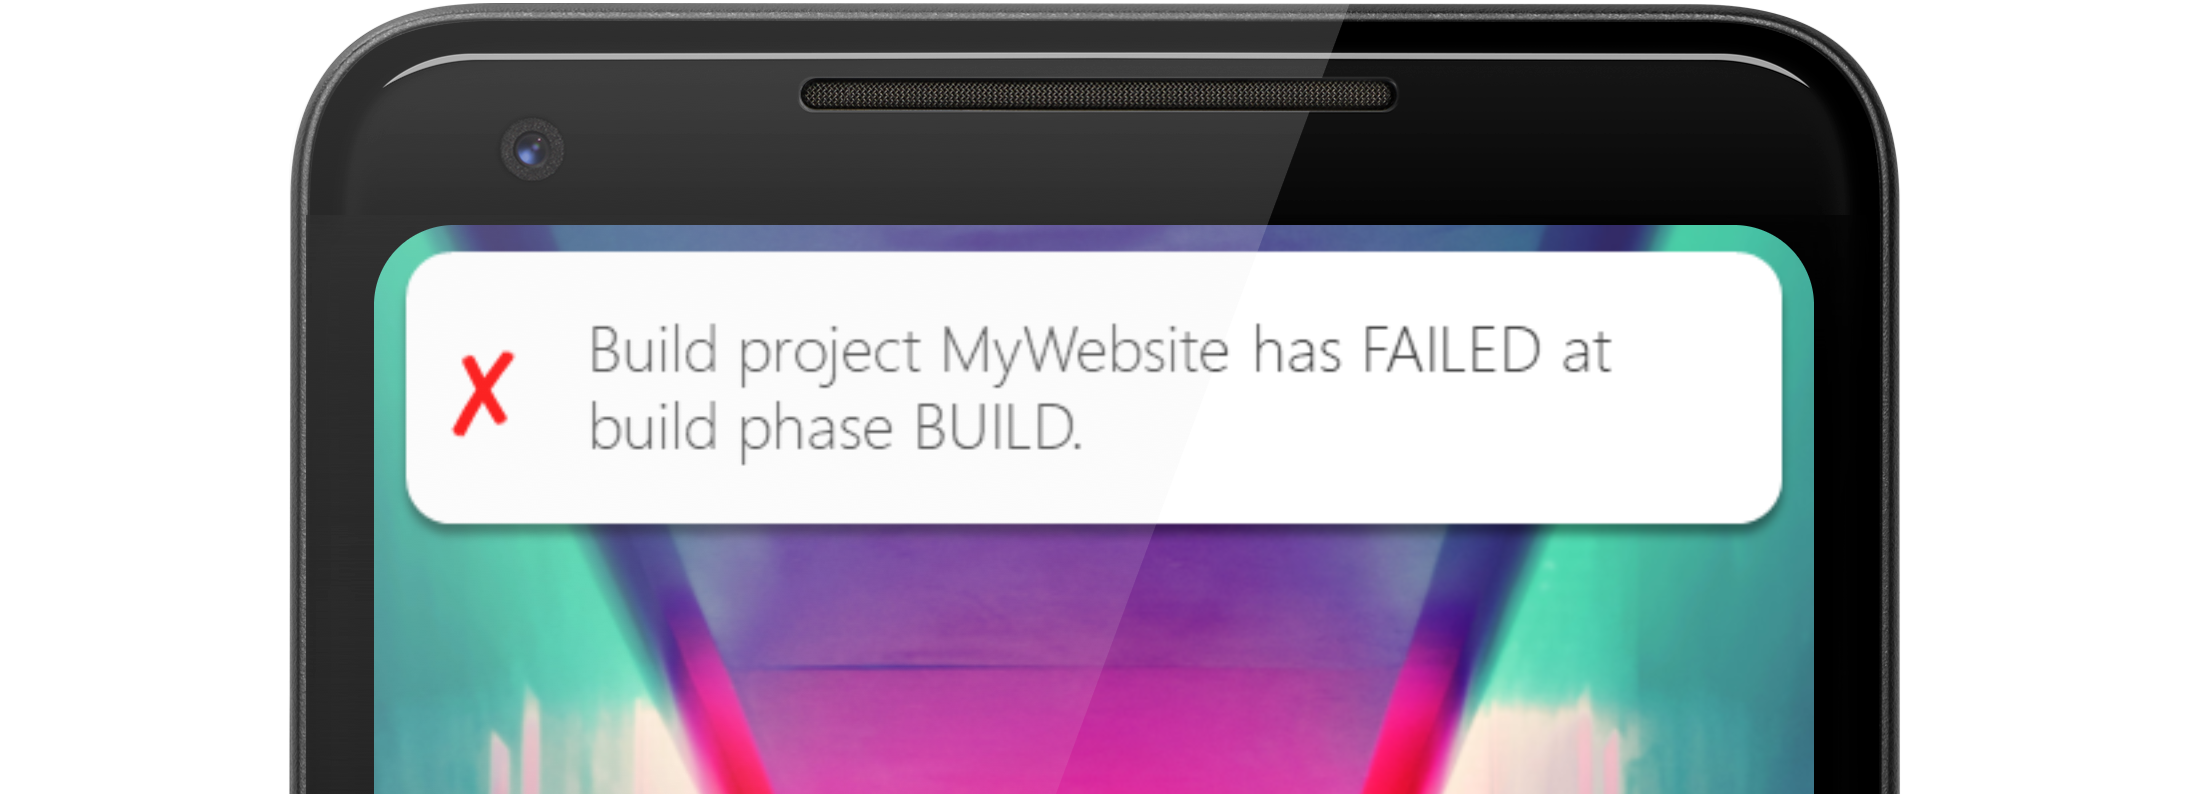 A mobile phone showing a failure notification with the text &ldquo;Build project MyWebsite has failed at step build&rdquo;.